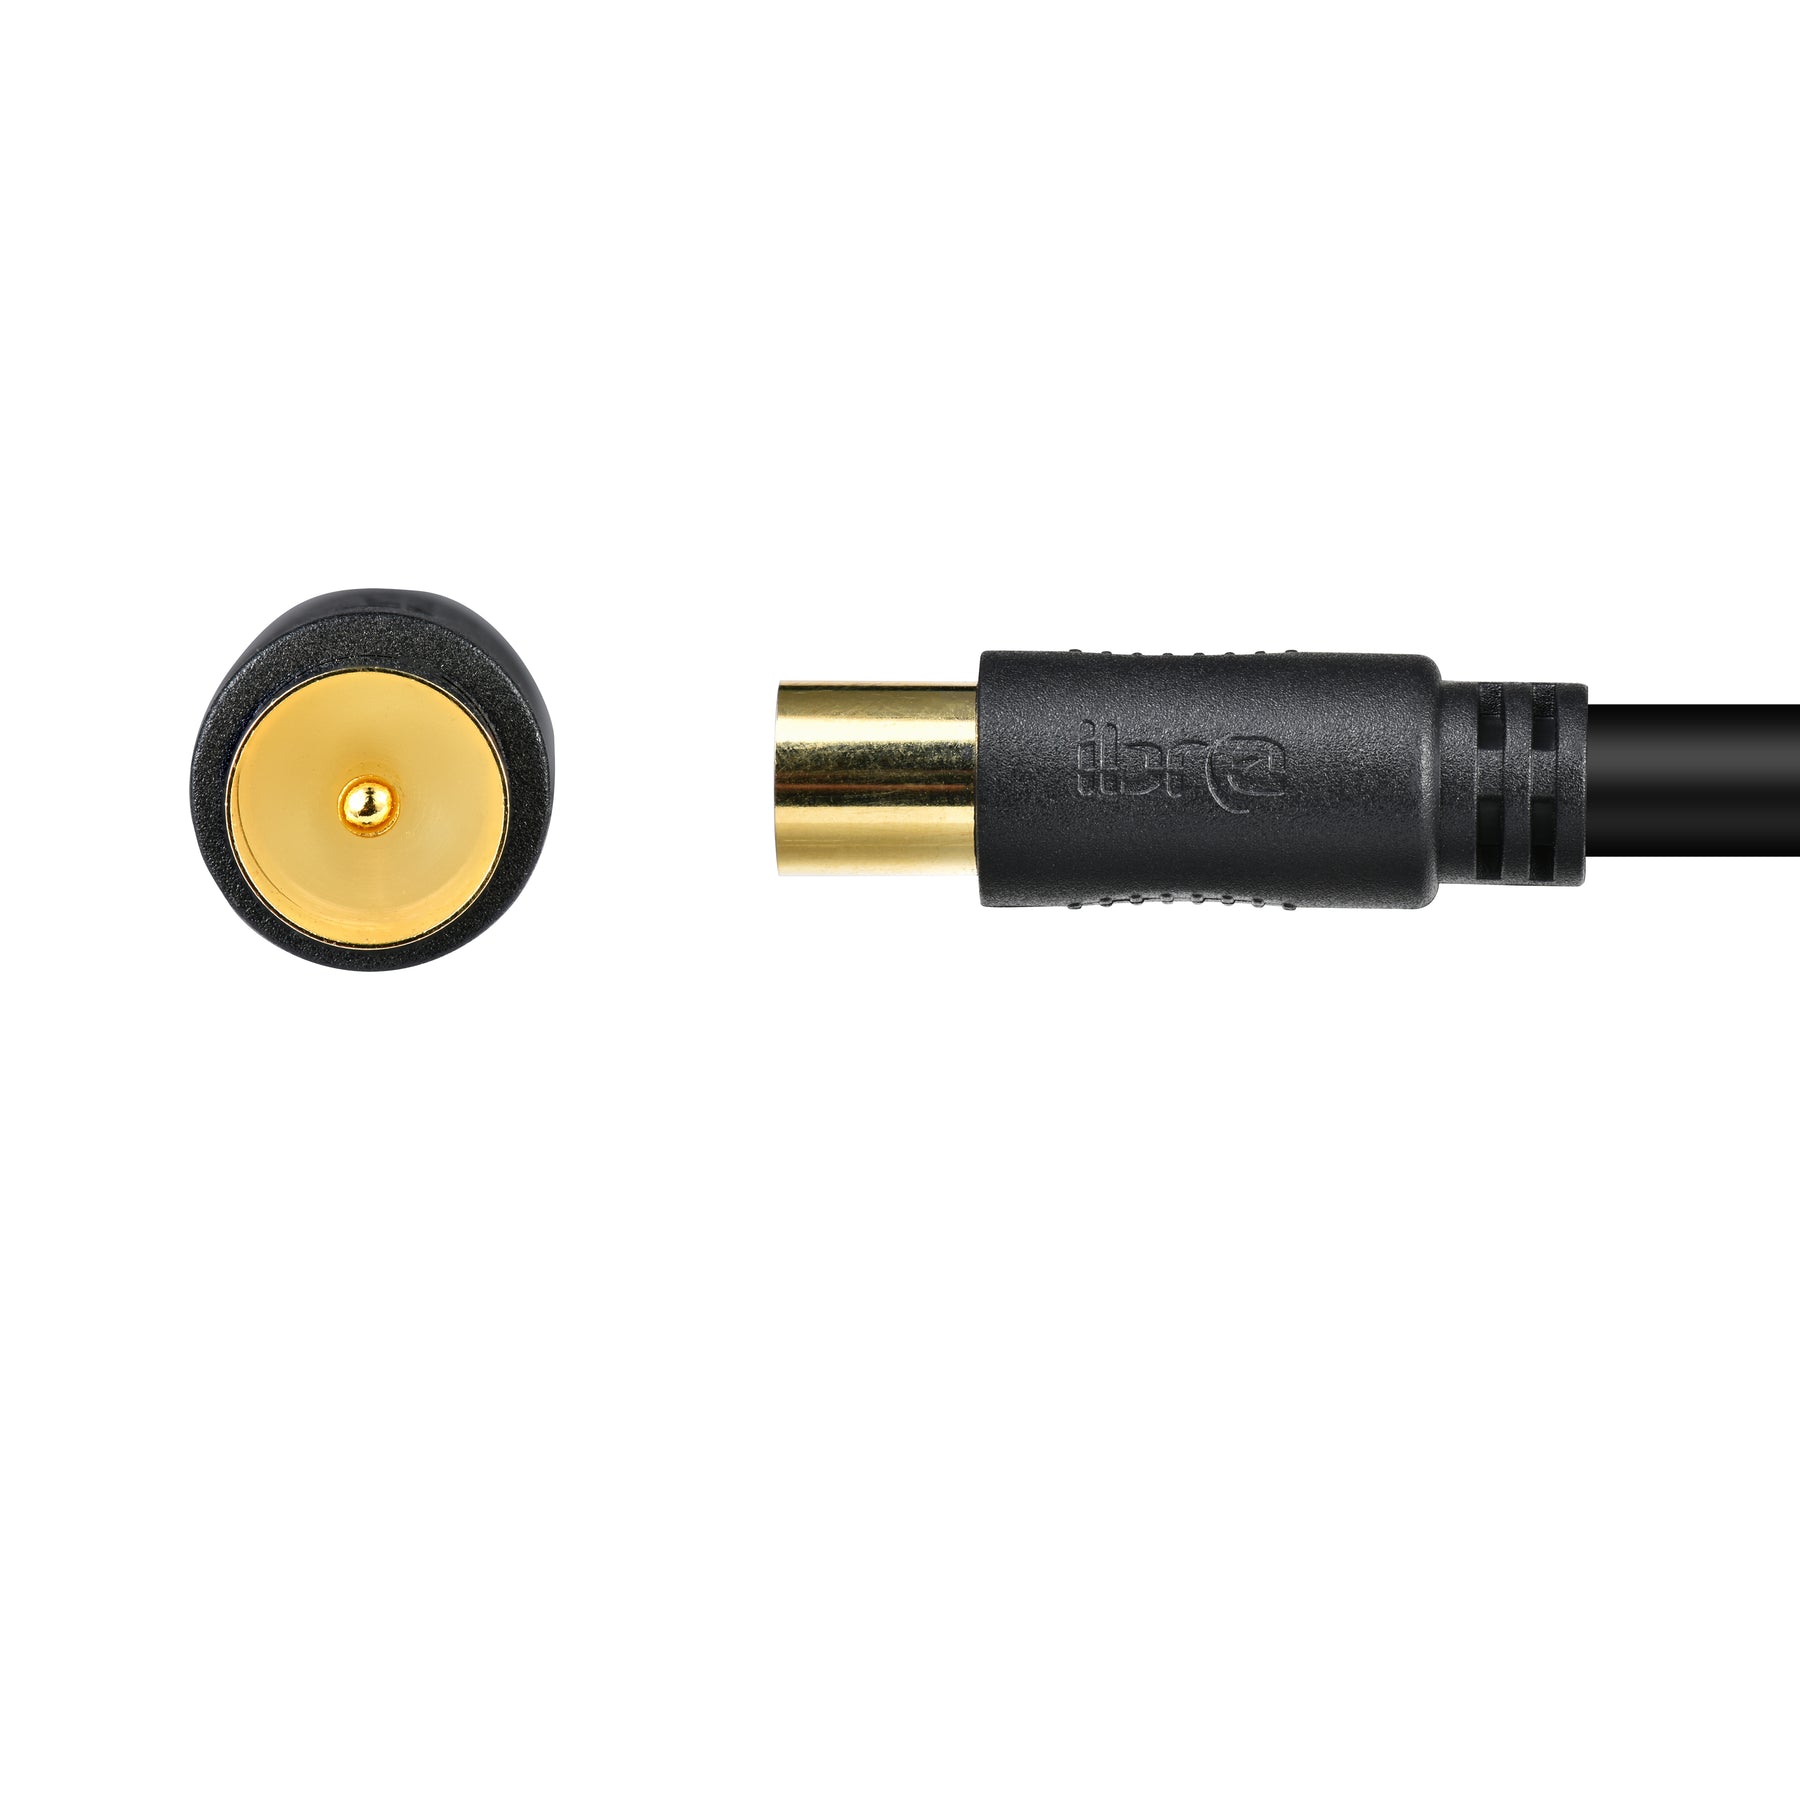 IBRA Aerial Coaxial Cable 10M with Gold-Plated Connectors, Male to Male RF Coax Lead with Female Adapter Coupler for Freeview, Freesat, Sky, Virgin, BT, You View, Satellite TV - Black